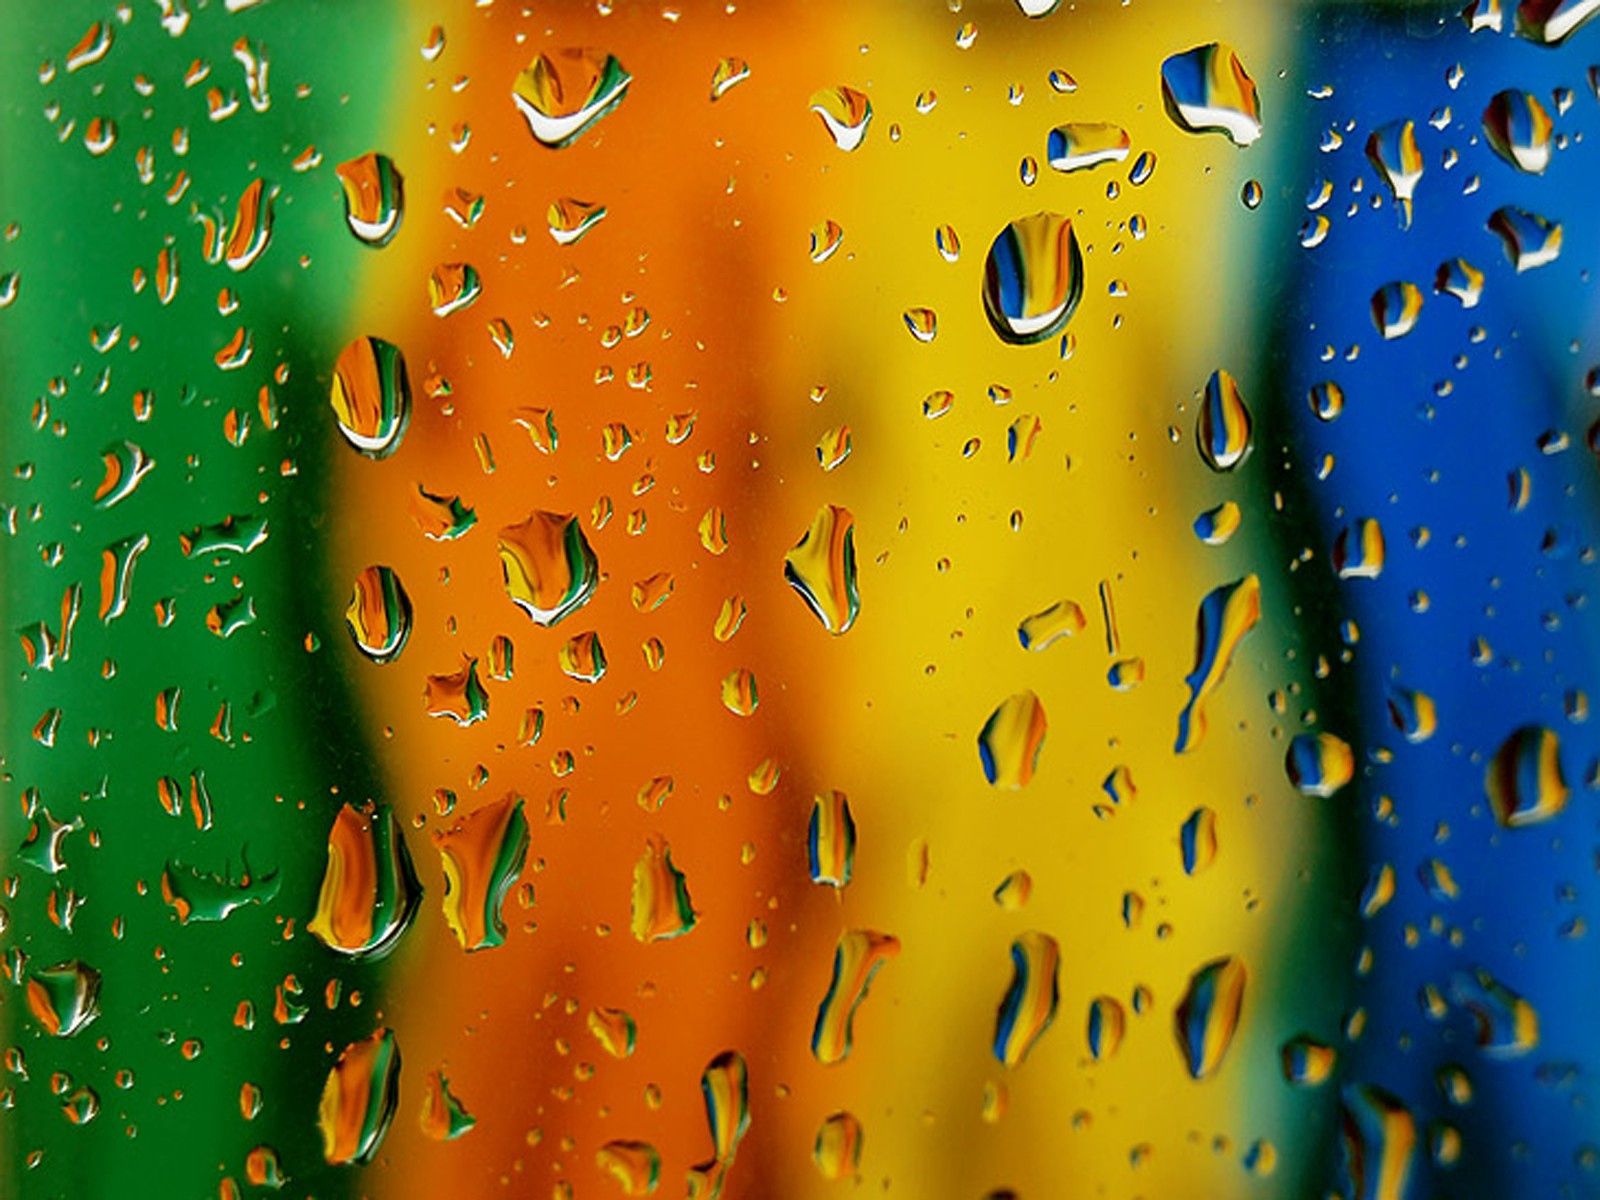 multicolored, motley, drops, texture, textures, surface UHD